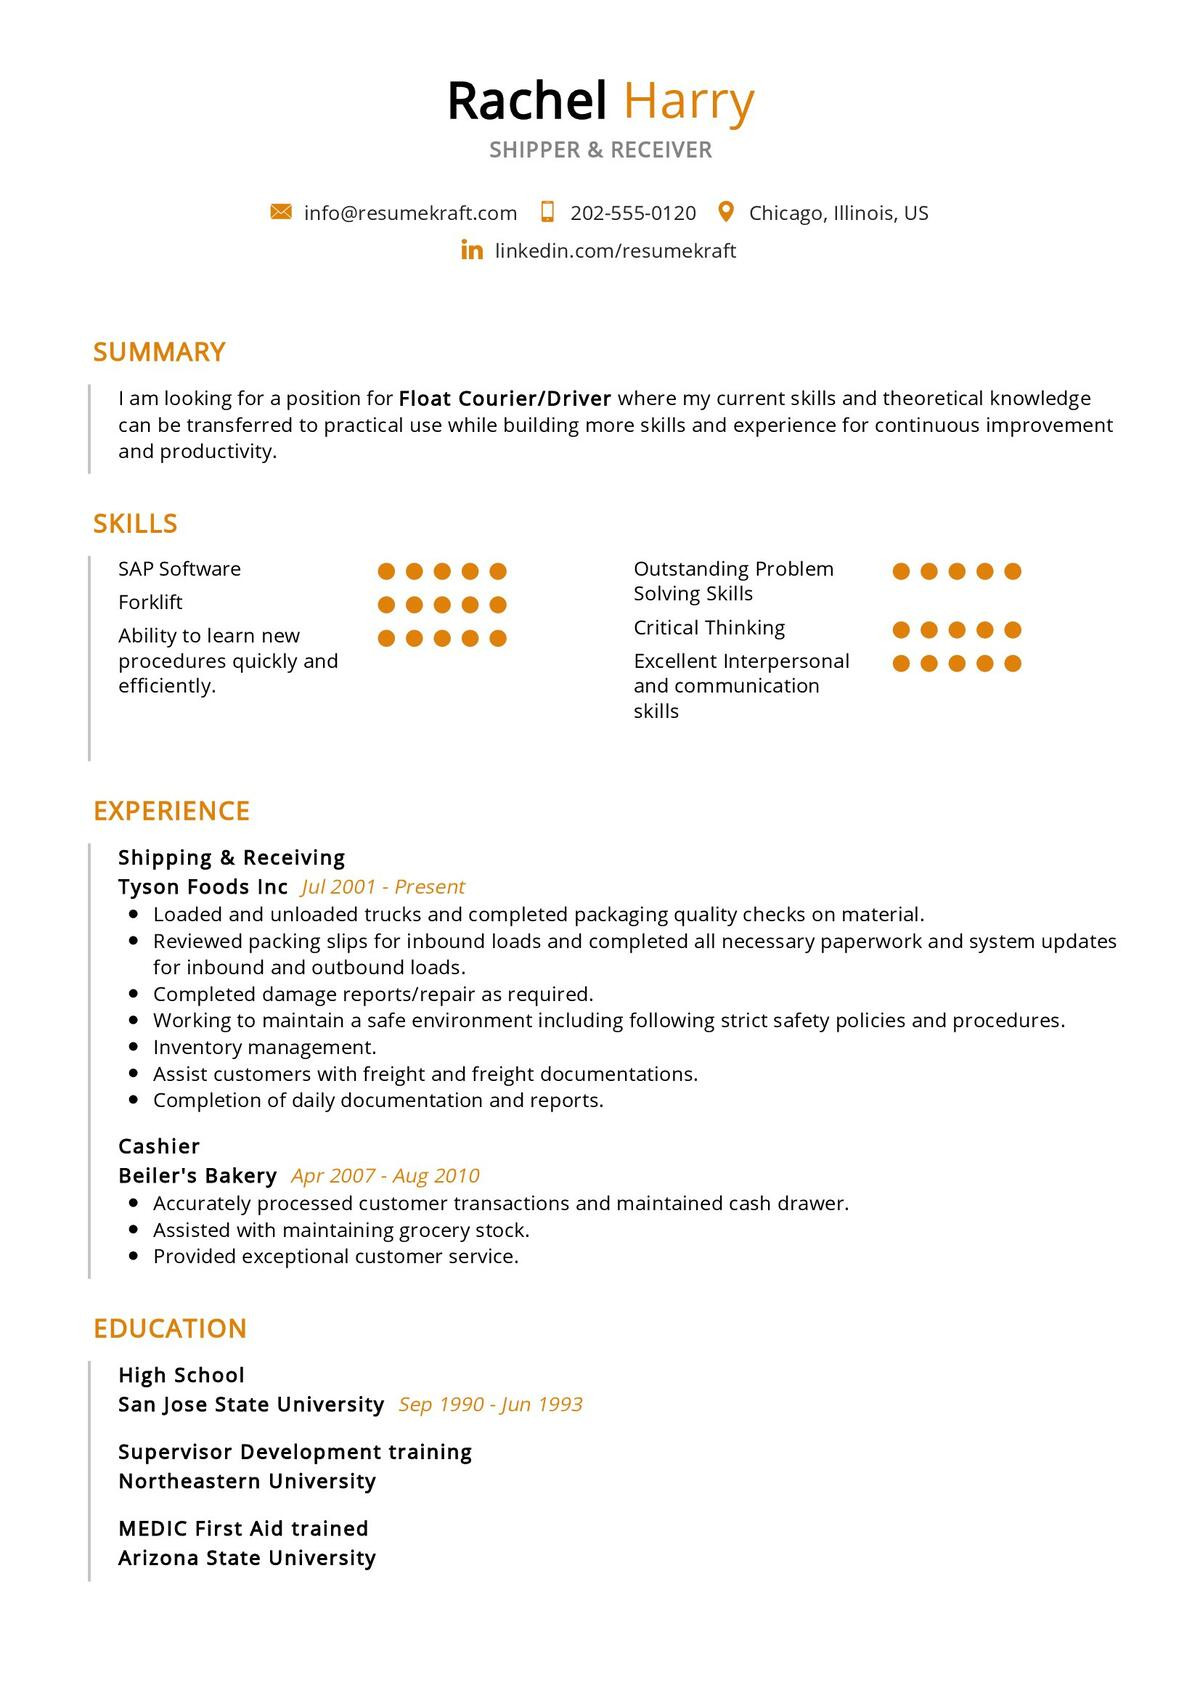 Sample Resume for Shipper and Receiver Shipper and Receiver Resume Sample 2022 Writing Tips – Resumekraft